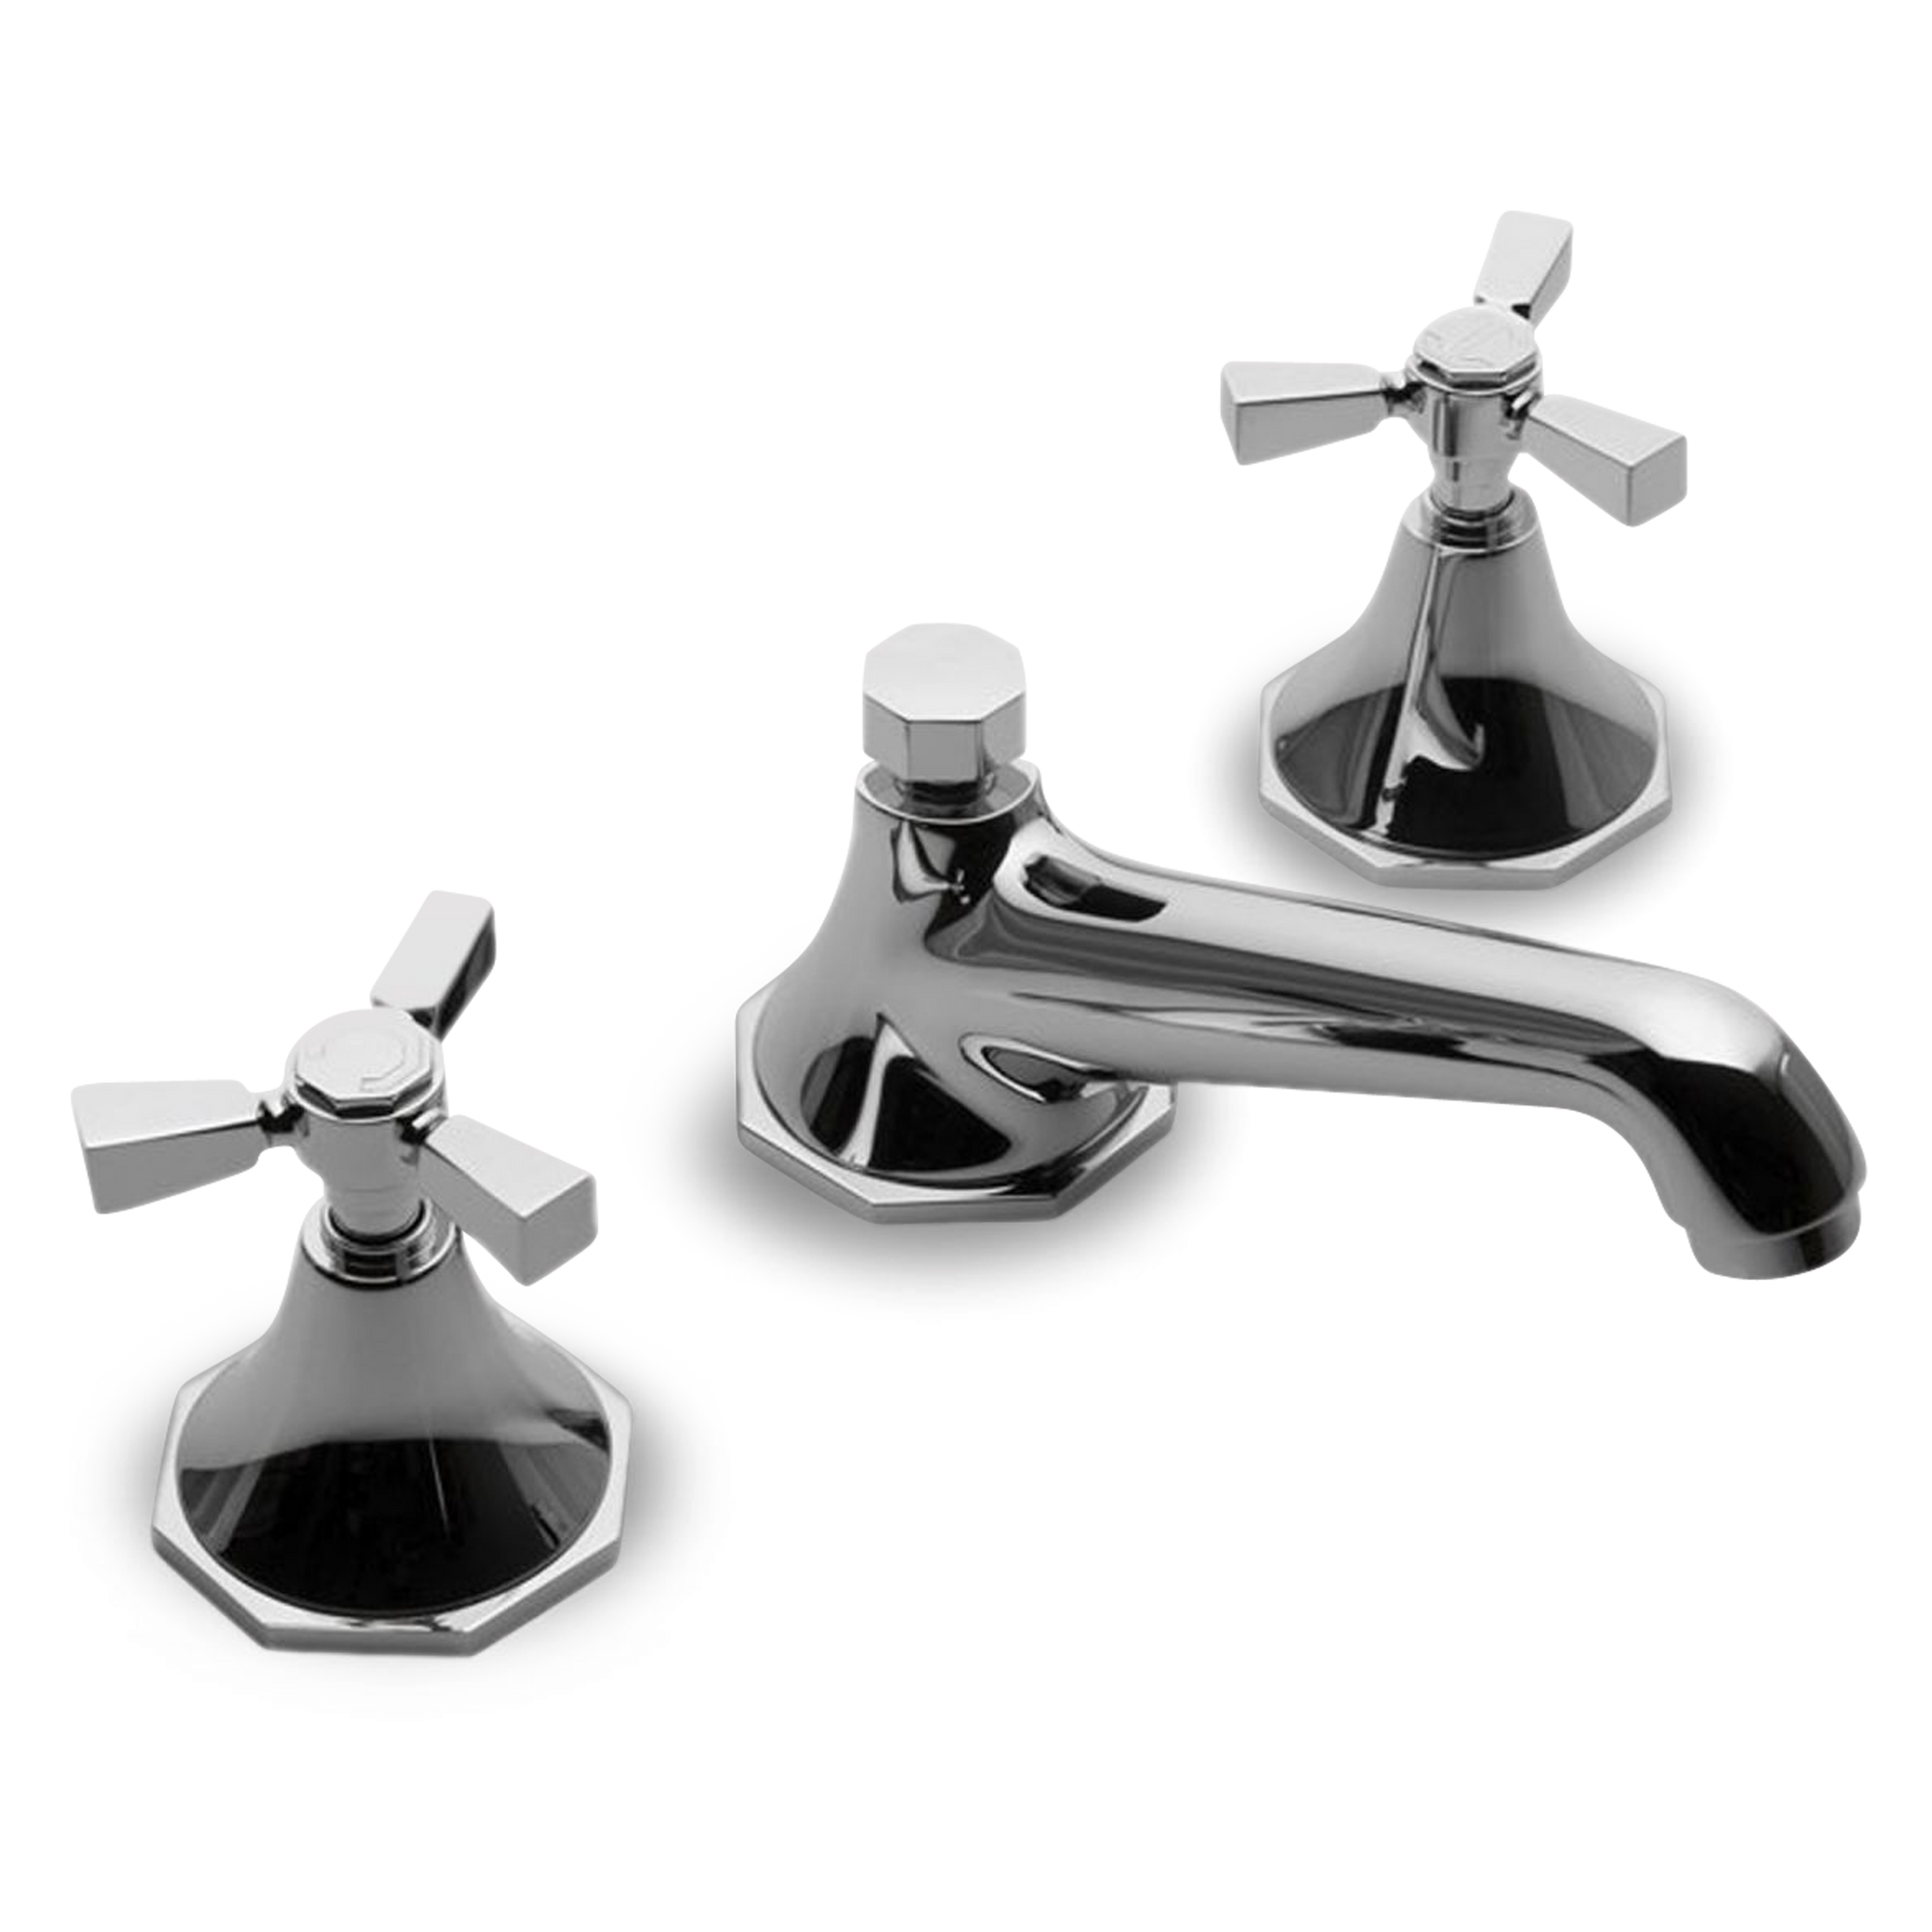 A traditional widespread faucet with tri-spoke handles.